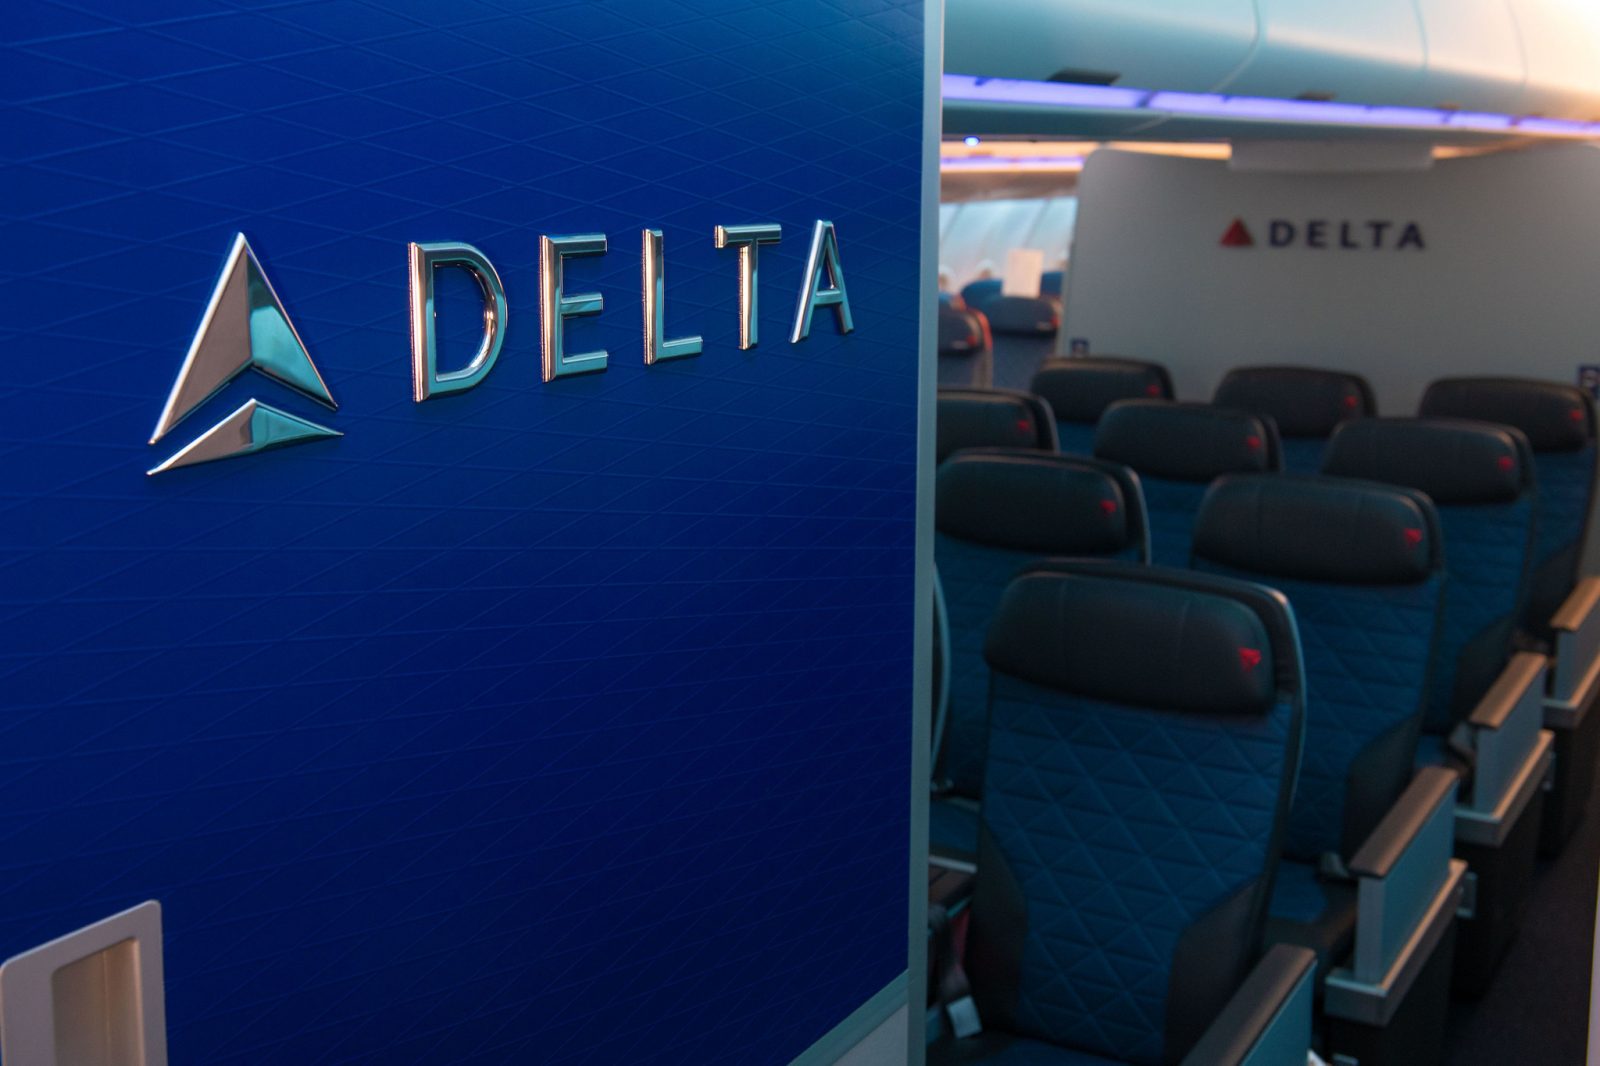 Delta Air Lines Plans to Hire Even More Flight Attendants, Pilots to Better Prepare for 2020